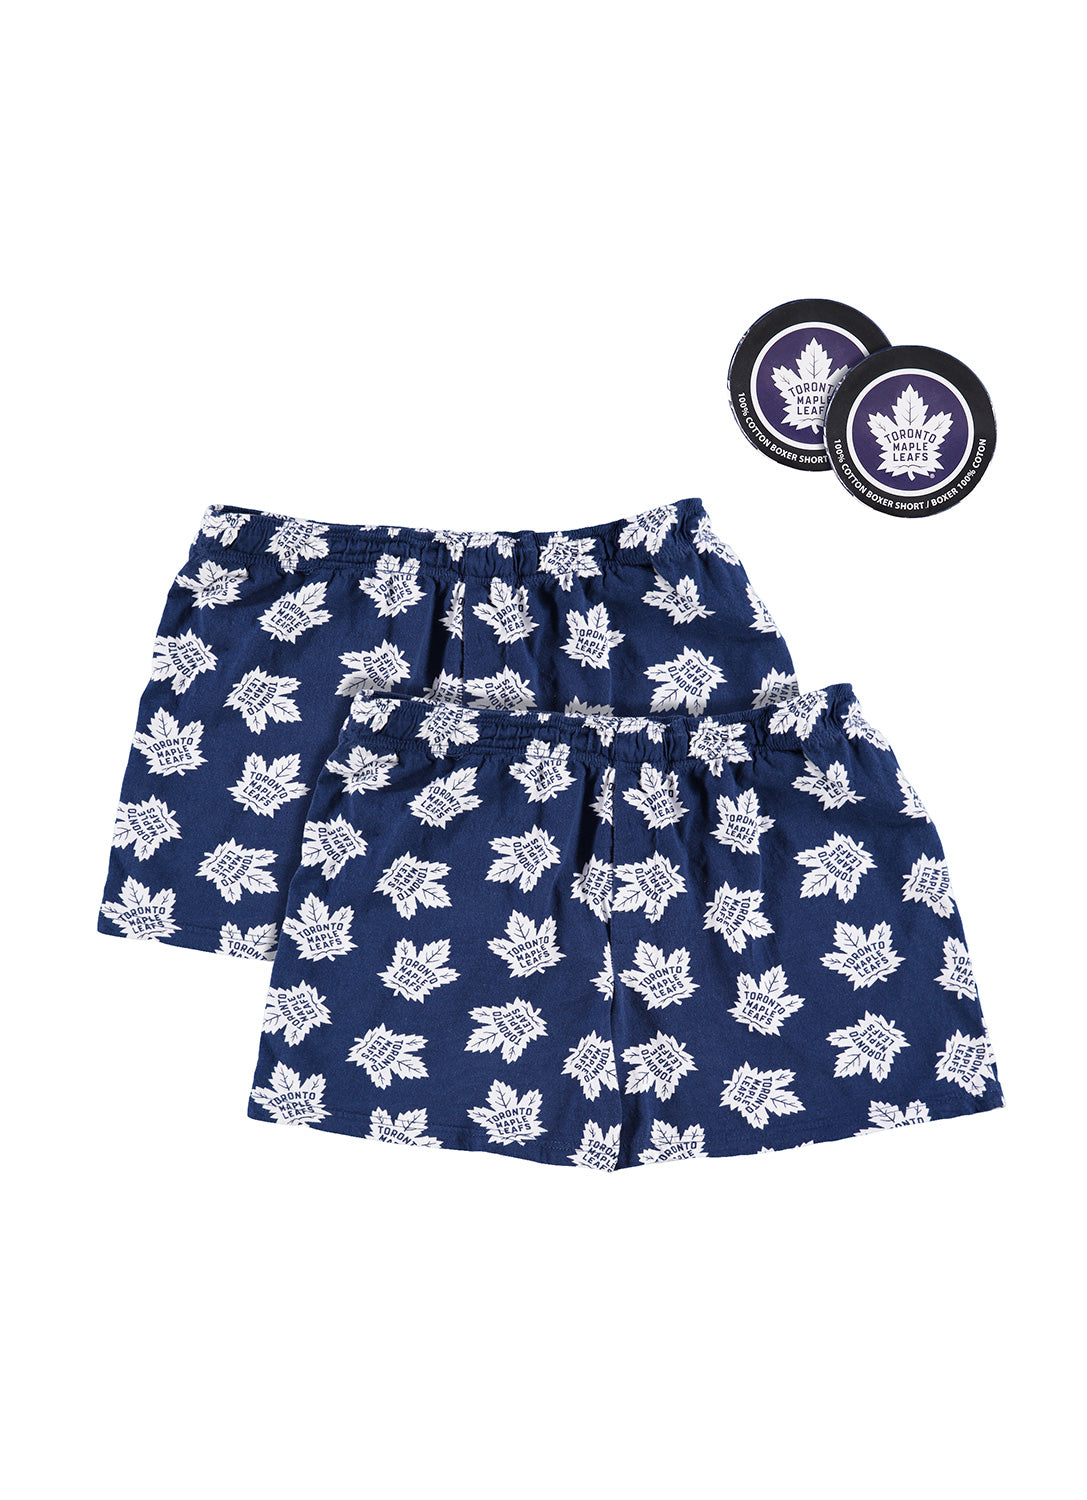 Pair of mens boxers with Toronto Maple Leafs print (blue)